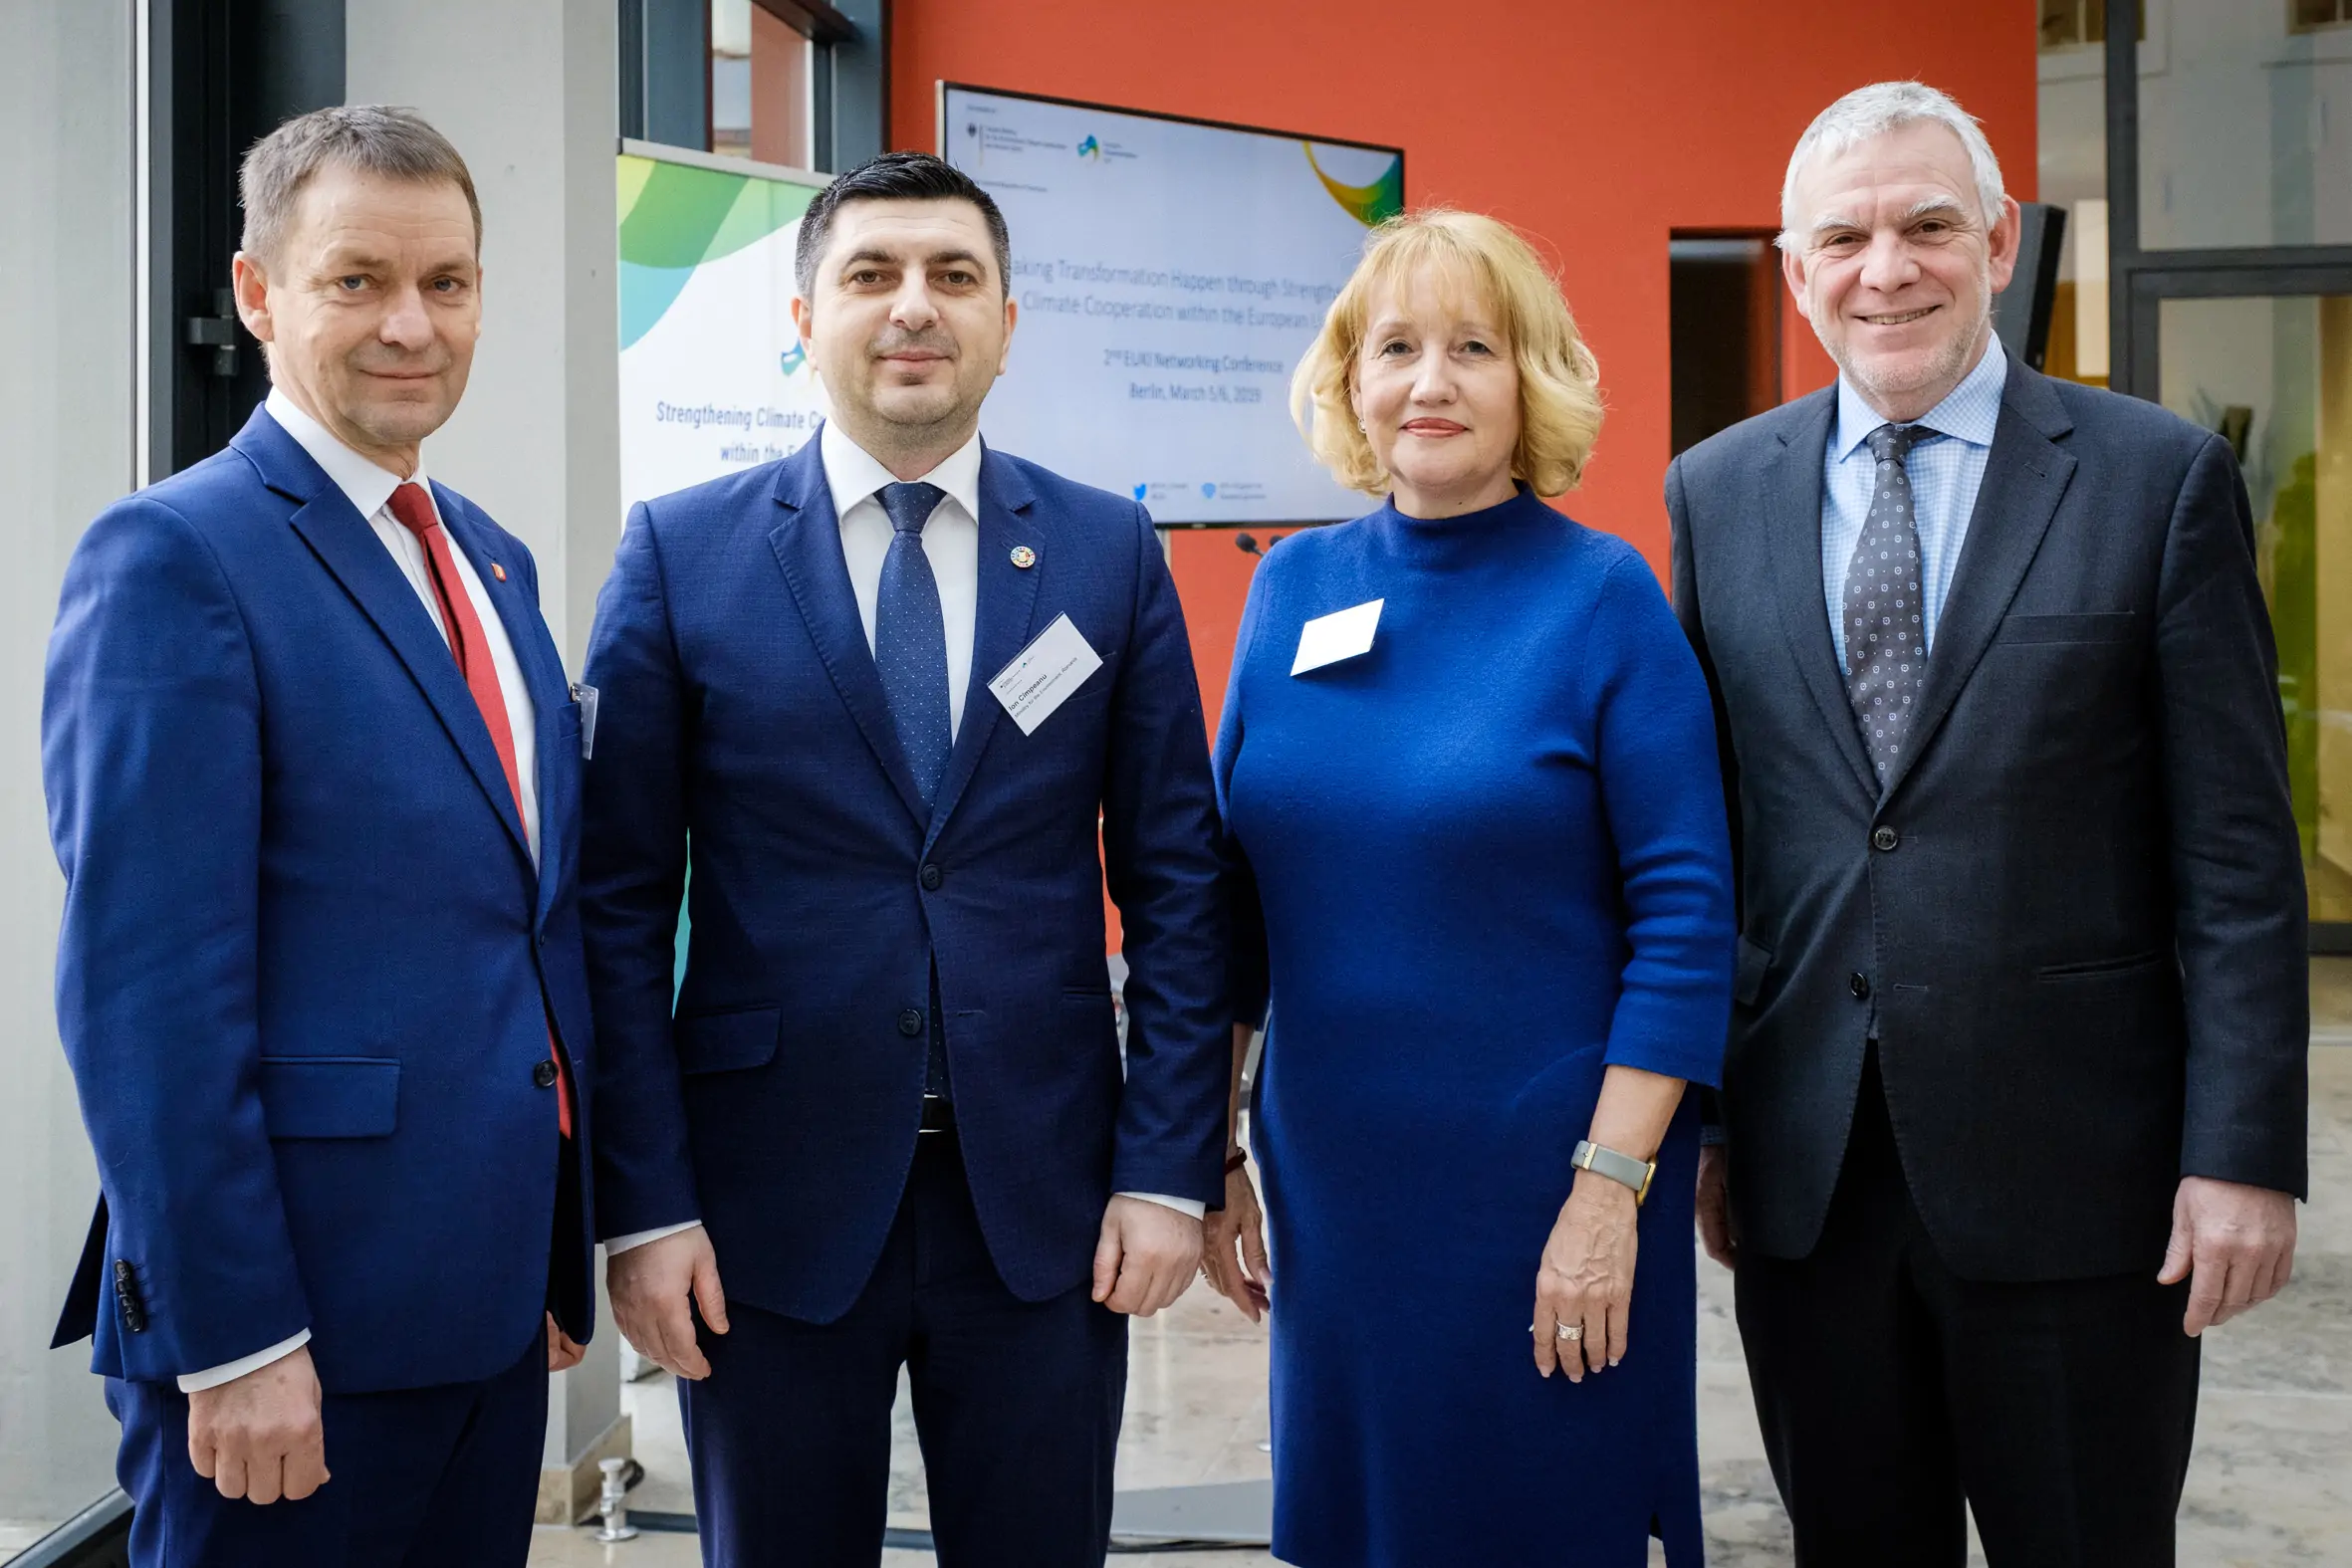 State secretaries and mayors spoke about the importance of the EUKI. From l-r, Leszek Tabor, Ion Cîmpeanu, Susanne Geils, Jochen Flasbarth. Photo: GIZ/ André Wagenzik